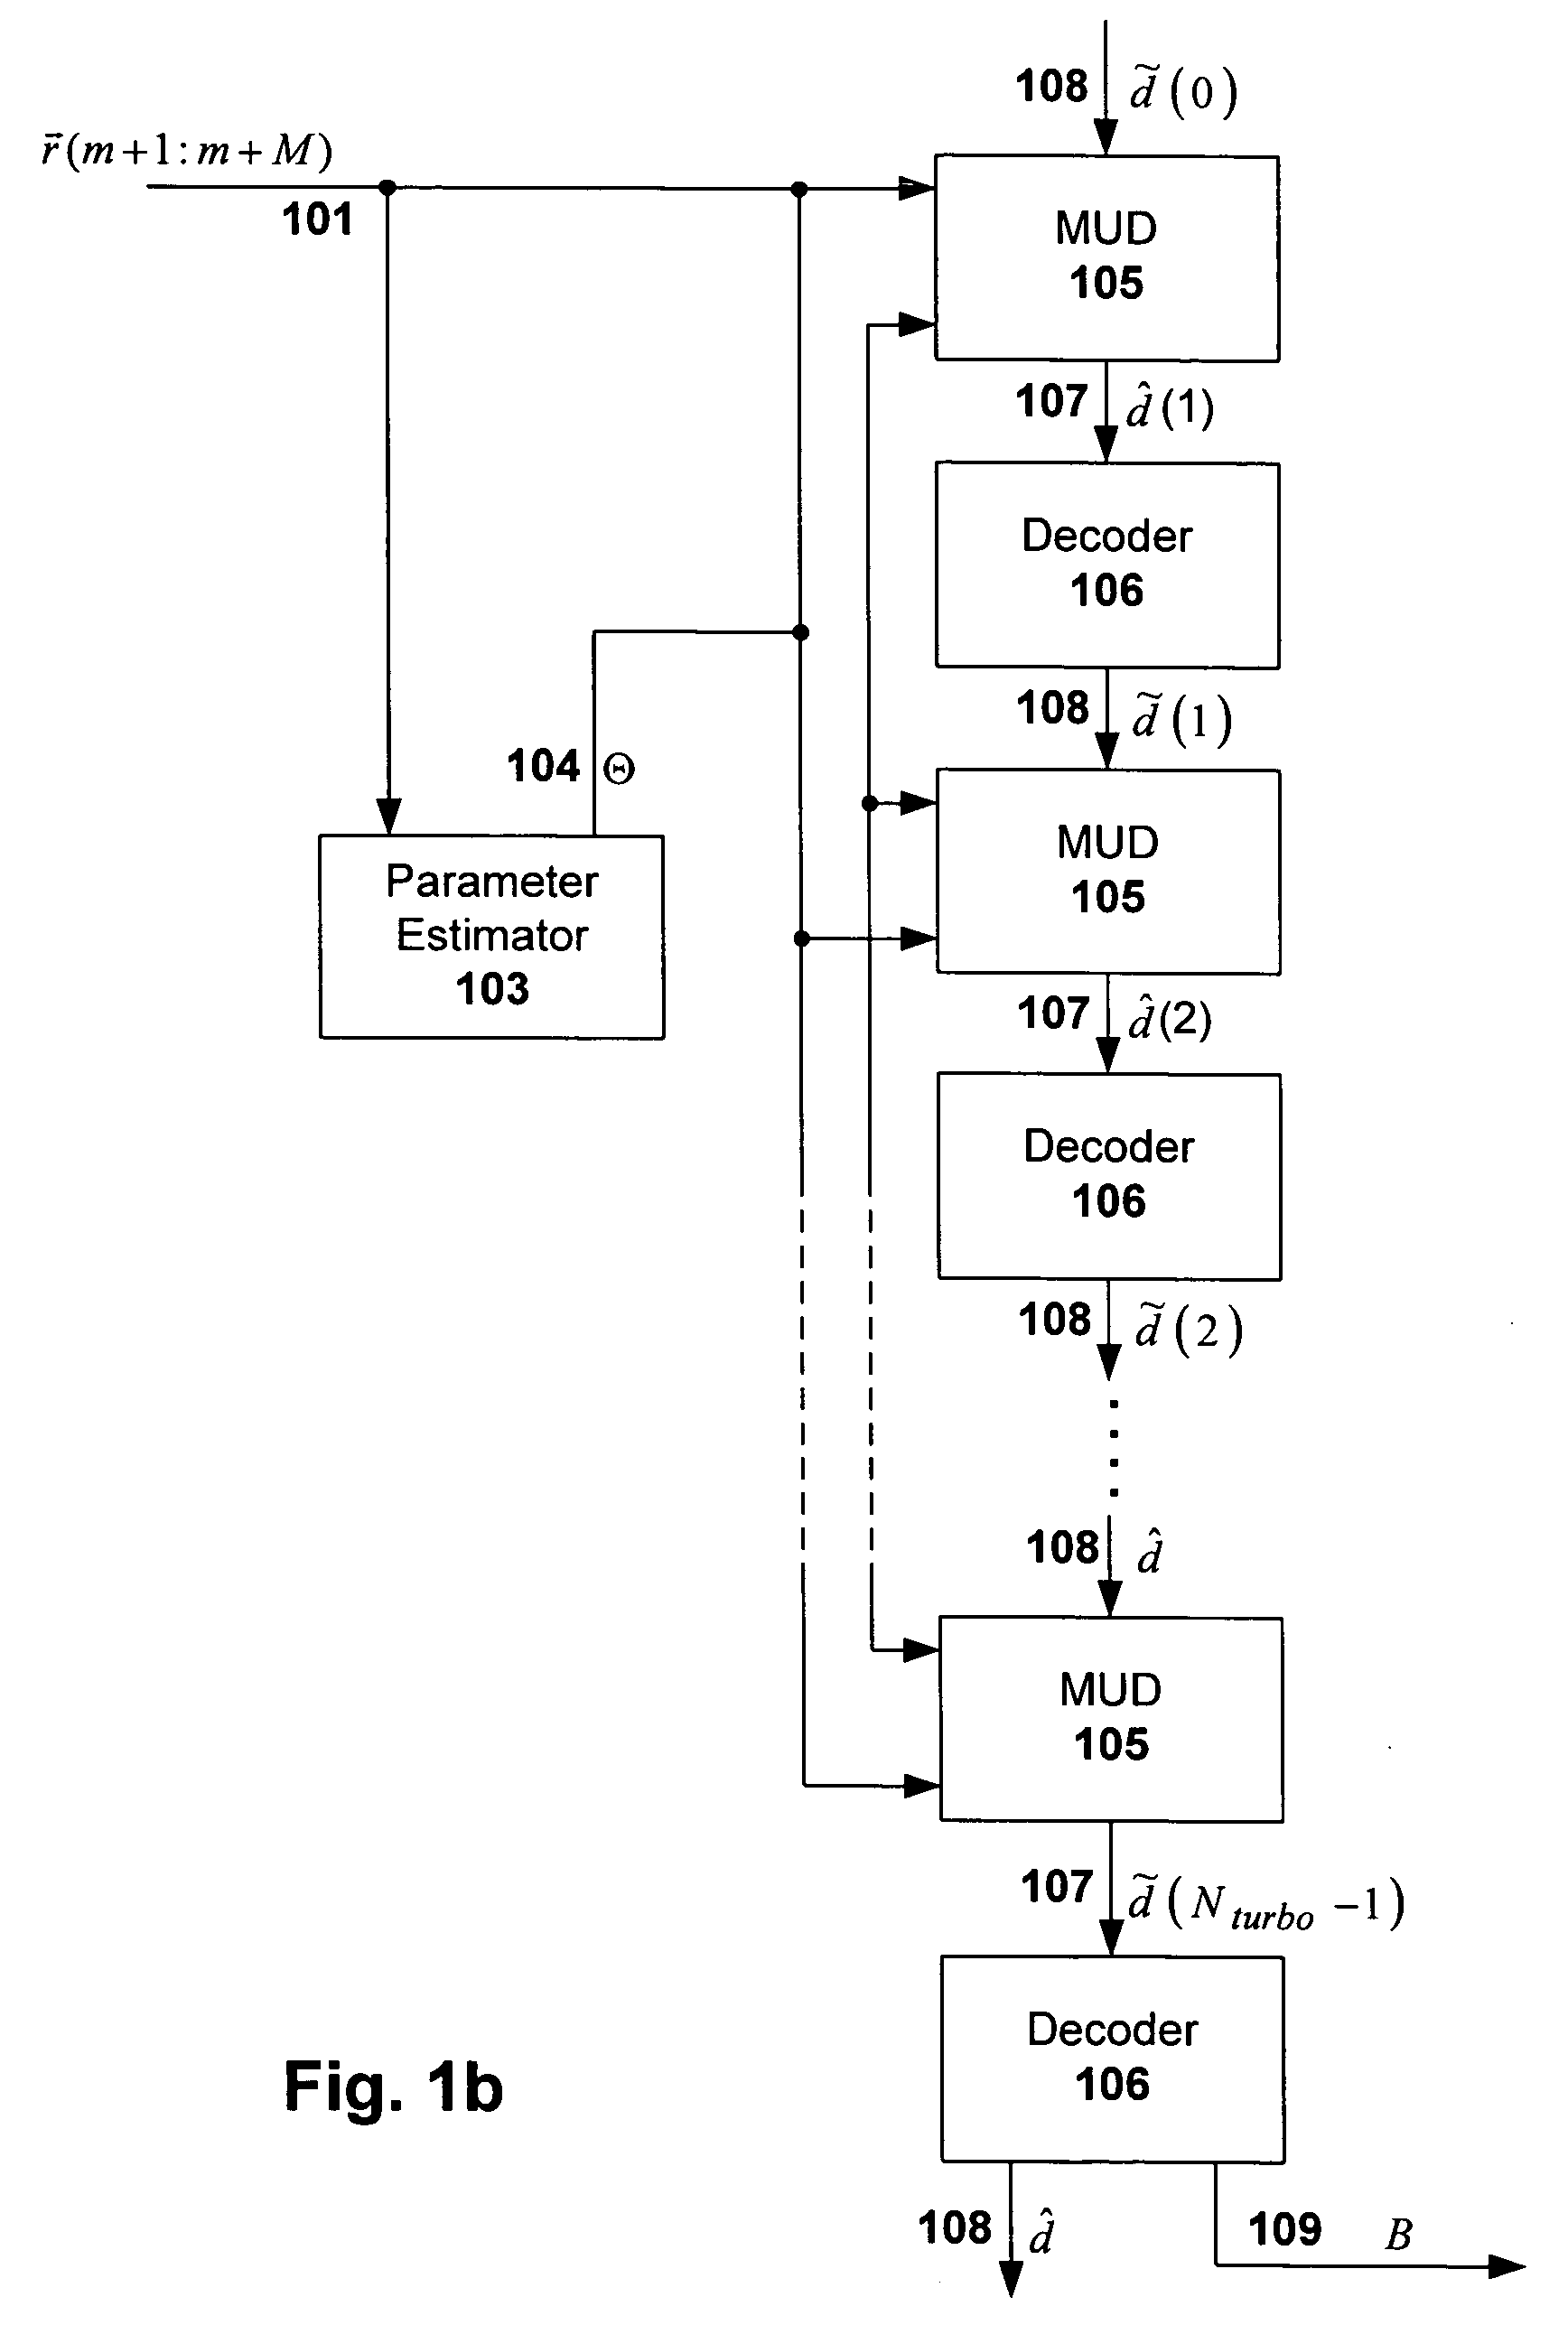 Multiuser detection with targeted error correction coding